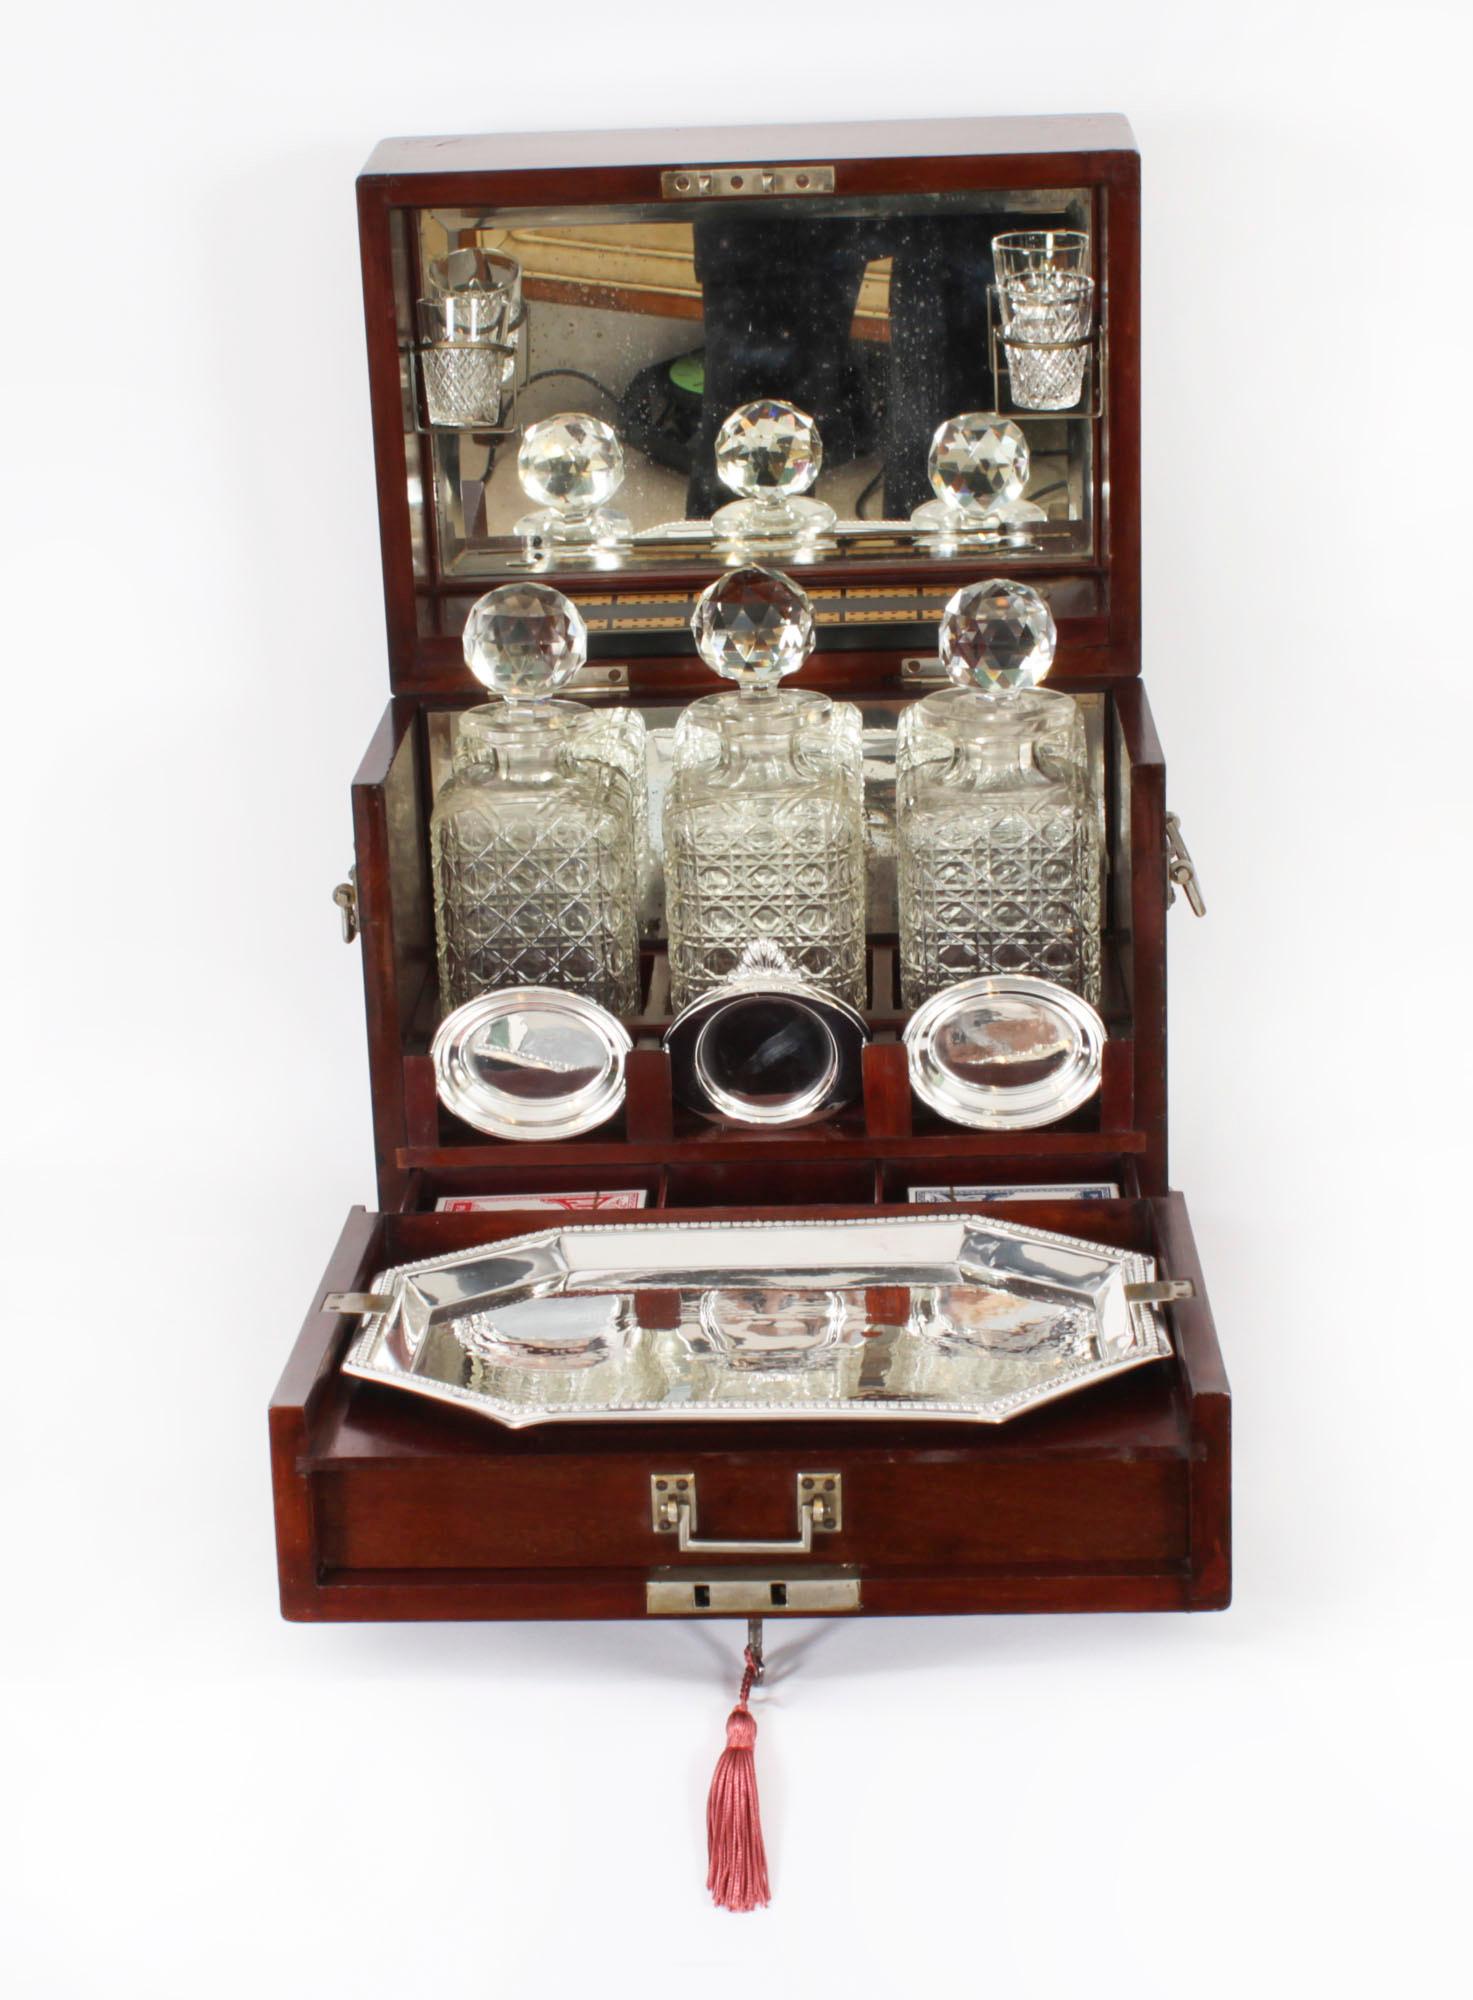 This is a fabulous antique Victorian games compendium and  tantalus, circa 1880 in date.

It consists of three cut crystal liquor bottles with stoppers, a pair of engraved shot glasses, a silver plated tray and a fitted cribbage board, all housed in